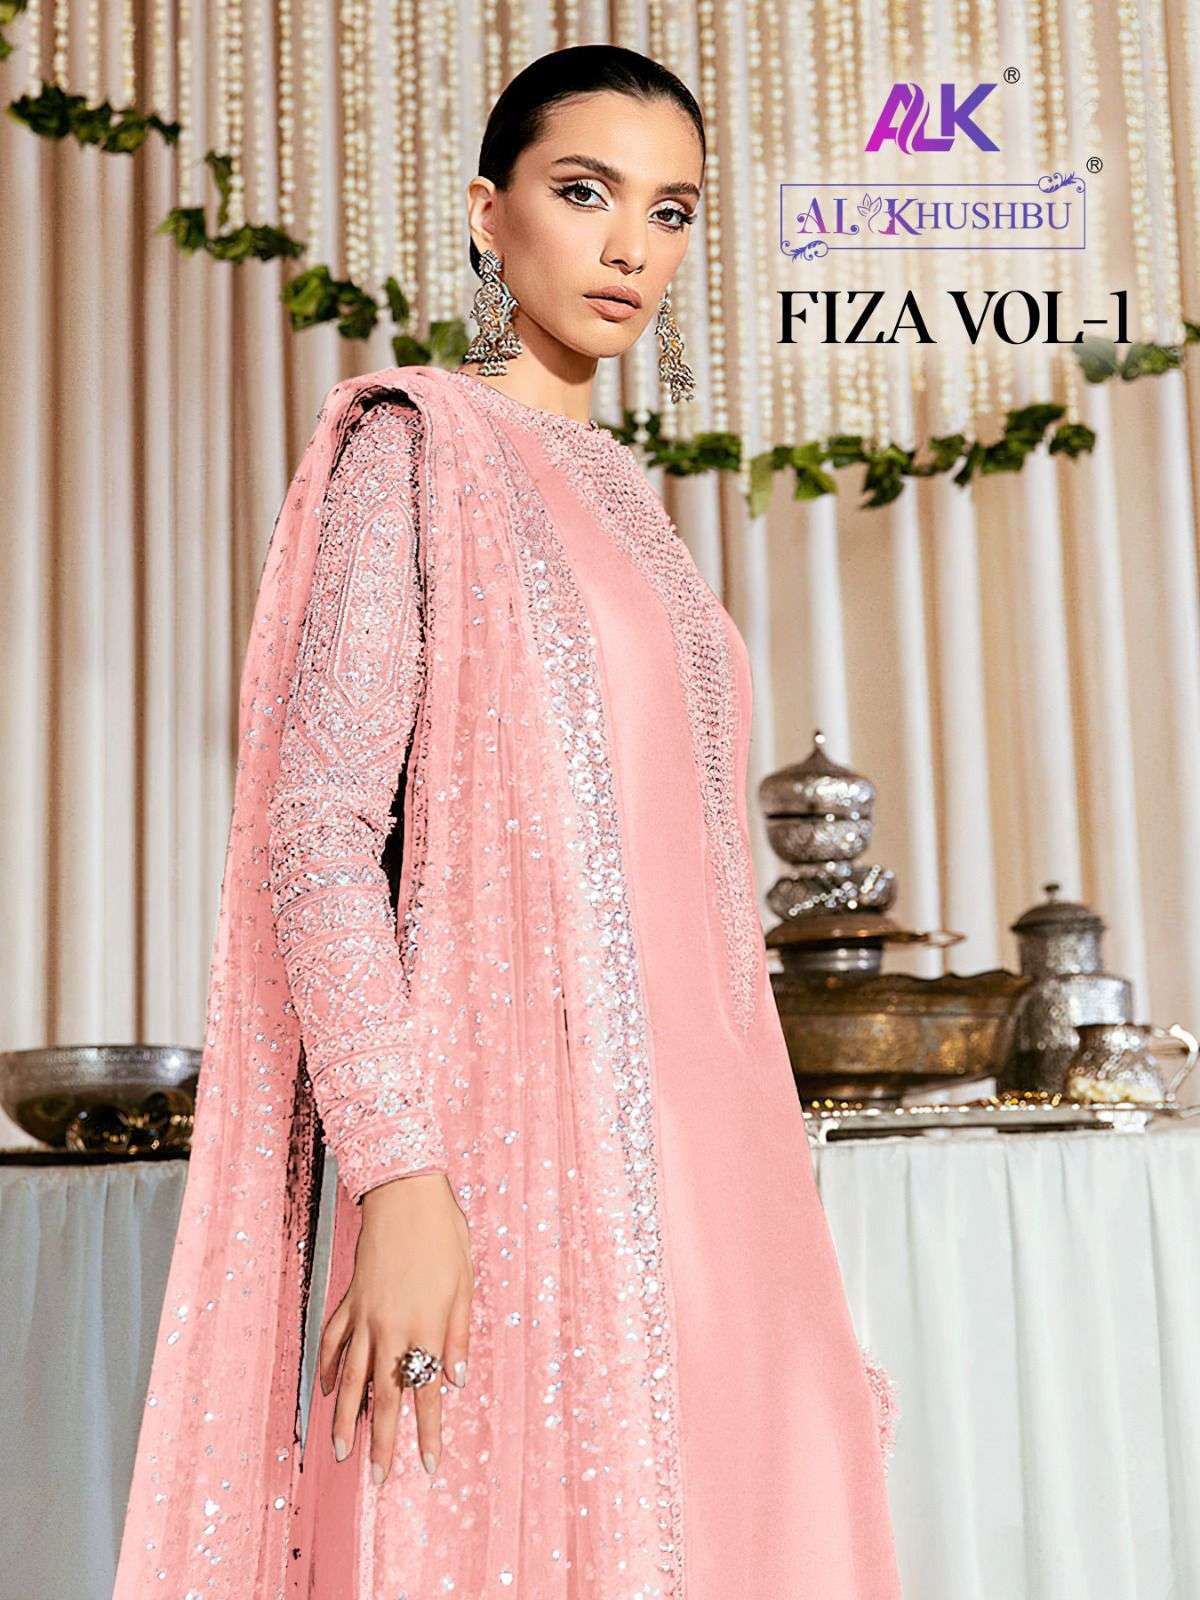 AL KHUSHBU FIZA VOL 1 GEORGETTE WITH HEAVY EMBROIDERED SUITS...